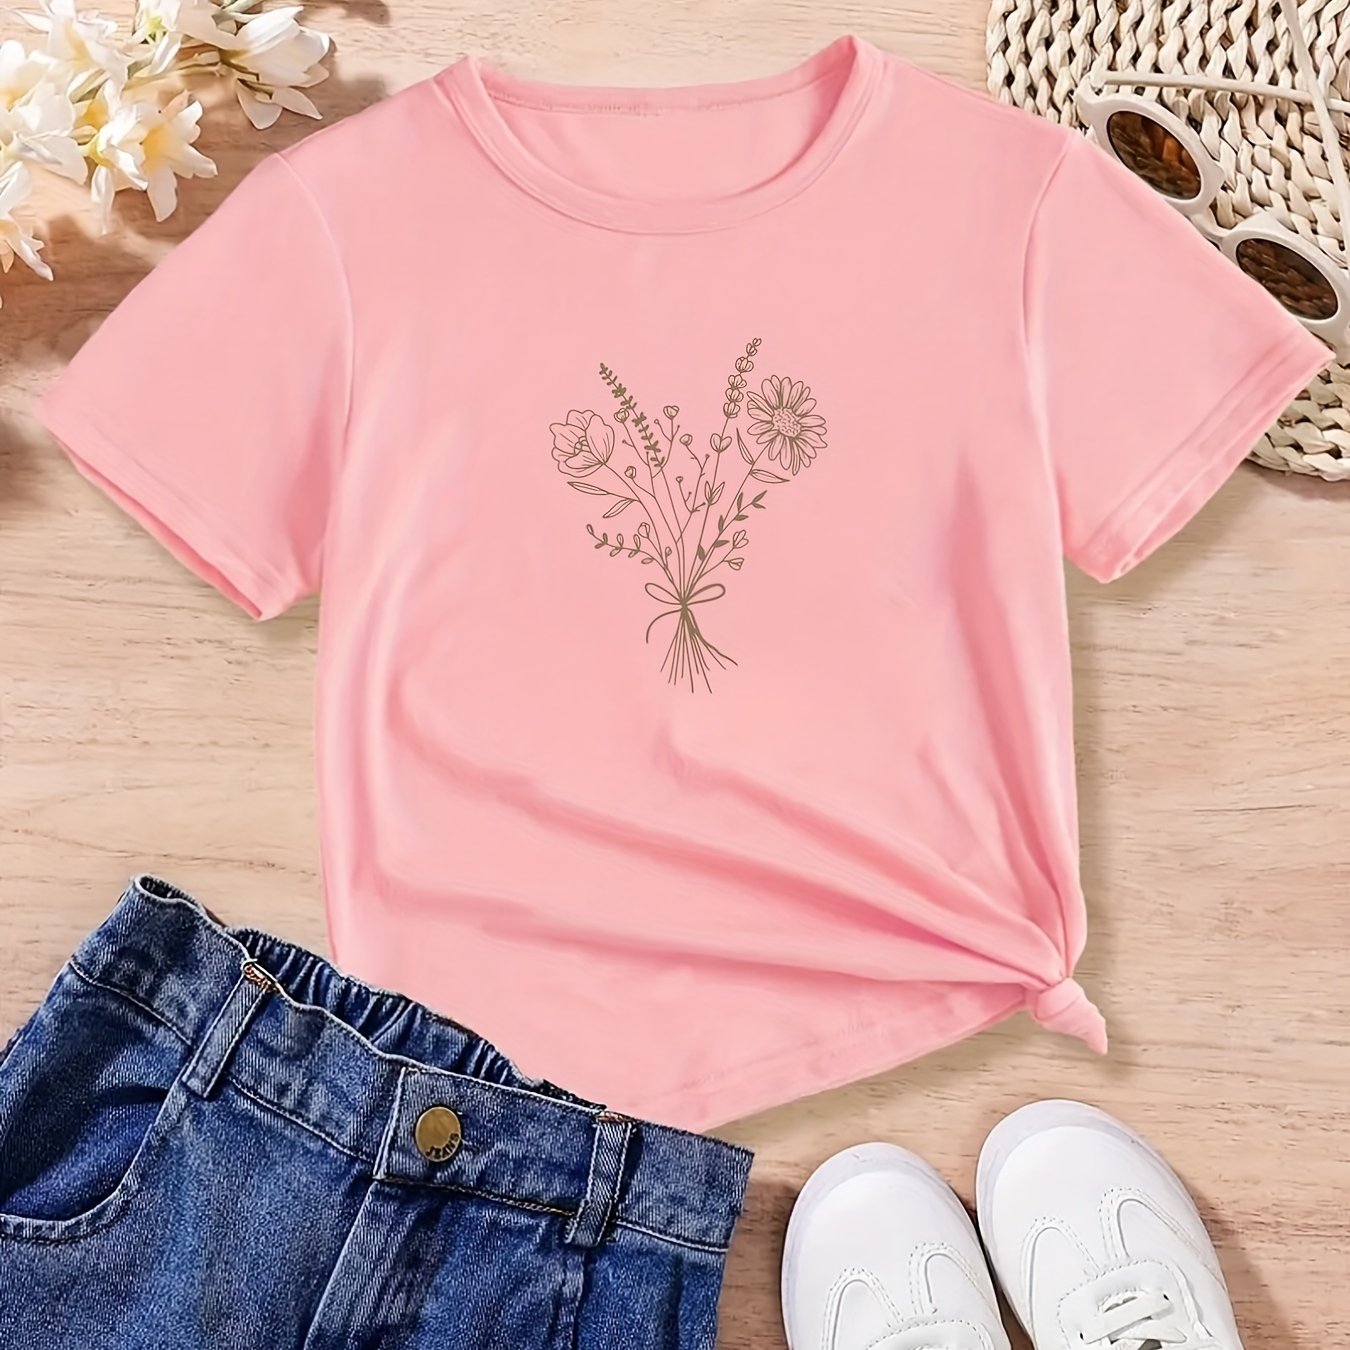 Flower and Bow. T-shirt Design. Fashion for Girls Stock Vector -  Illustration of leave, drawing: 55369218